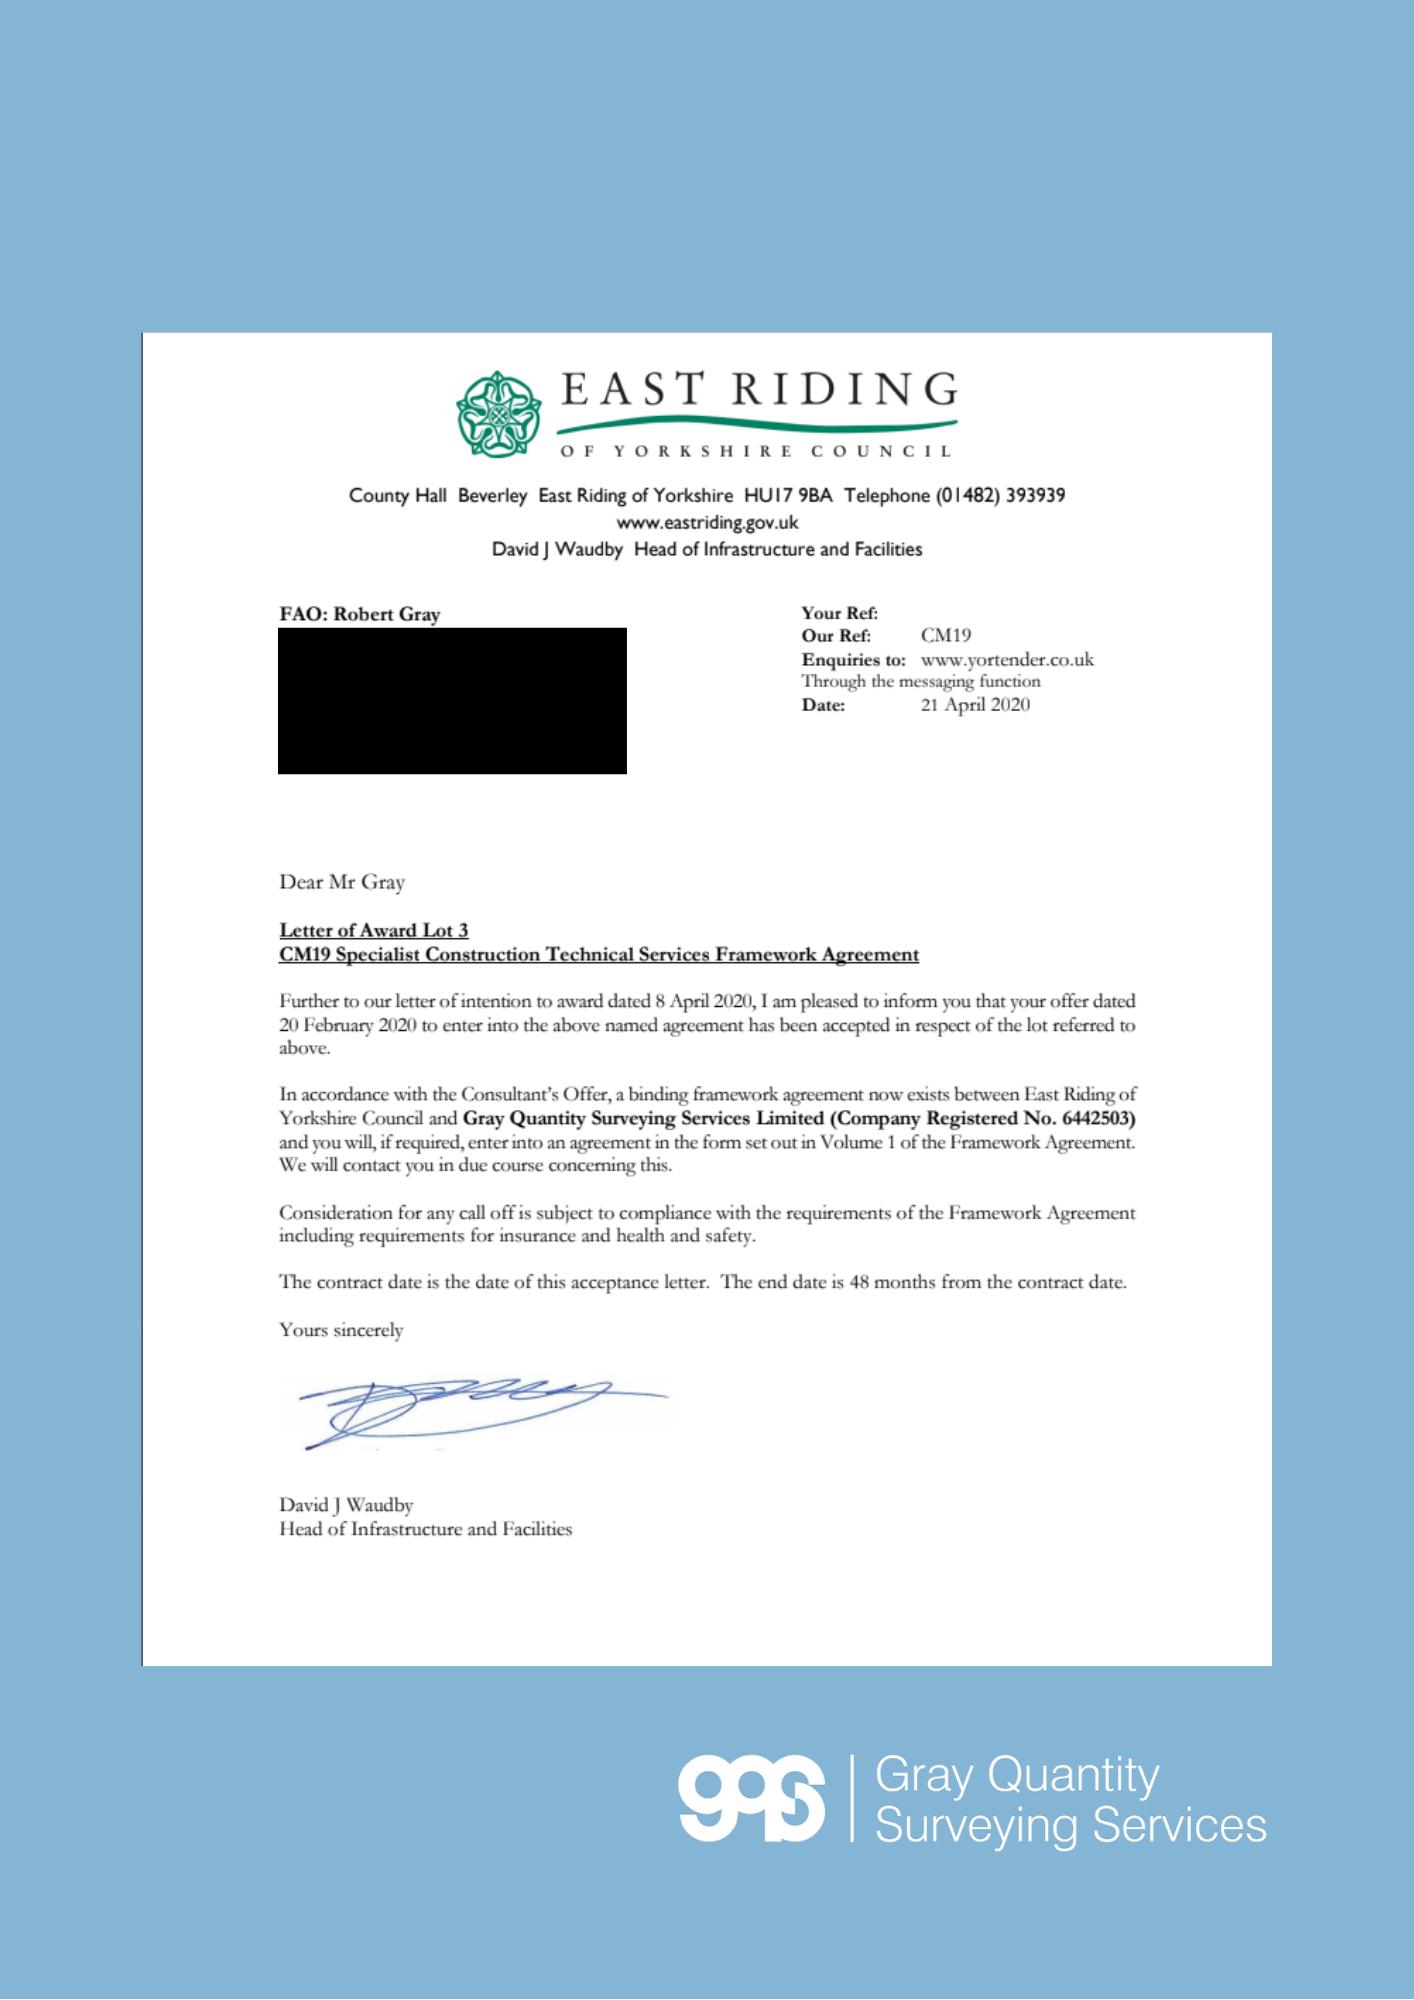 letter from East Riding of Yorkshire Council to Gray Quantity Surveying Services